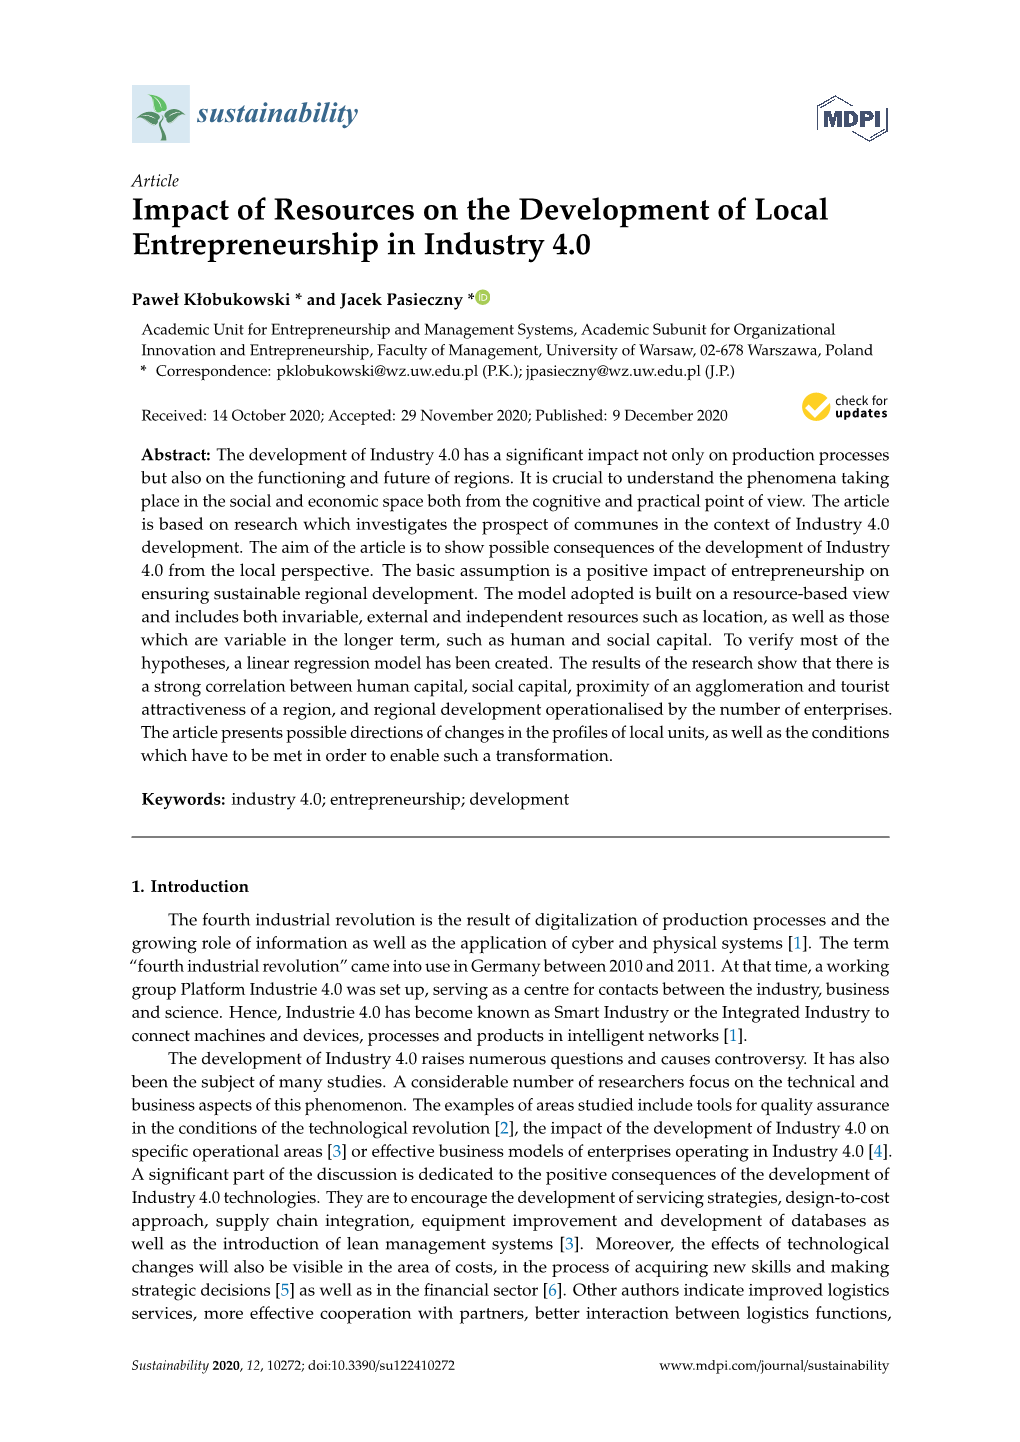 Impact of Resources on the Development of Local Entrepreneurship in Industry 4.0